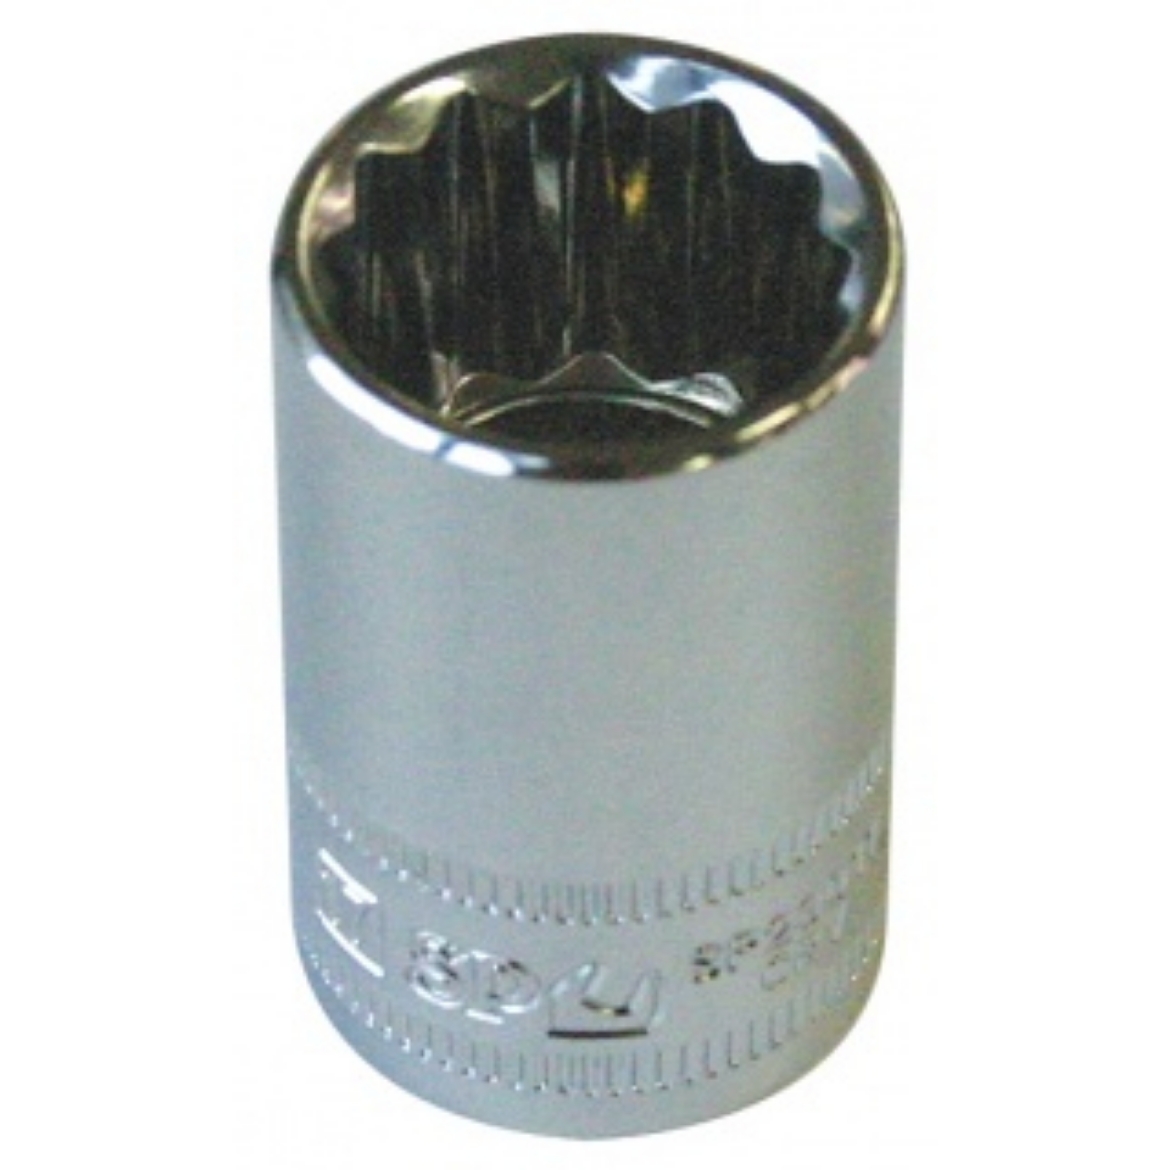 Picture of SOCKET 1/2"DR 12PT METRIC 15MM SP TOOLS